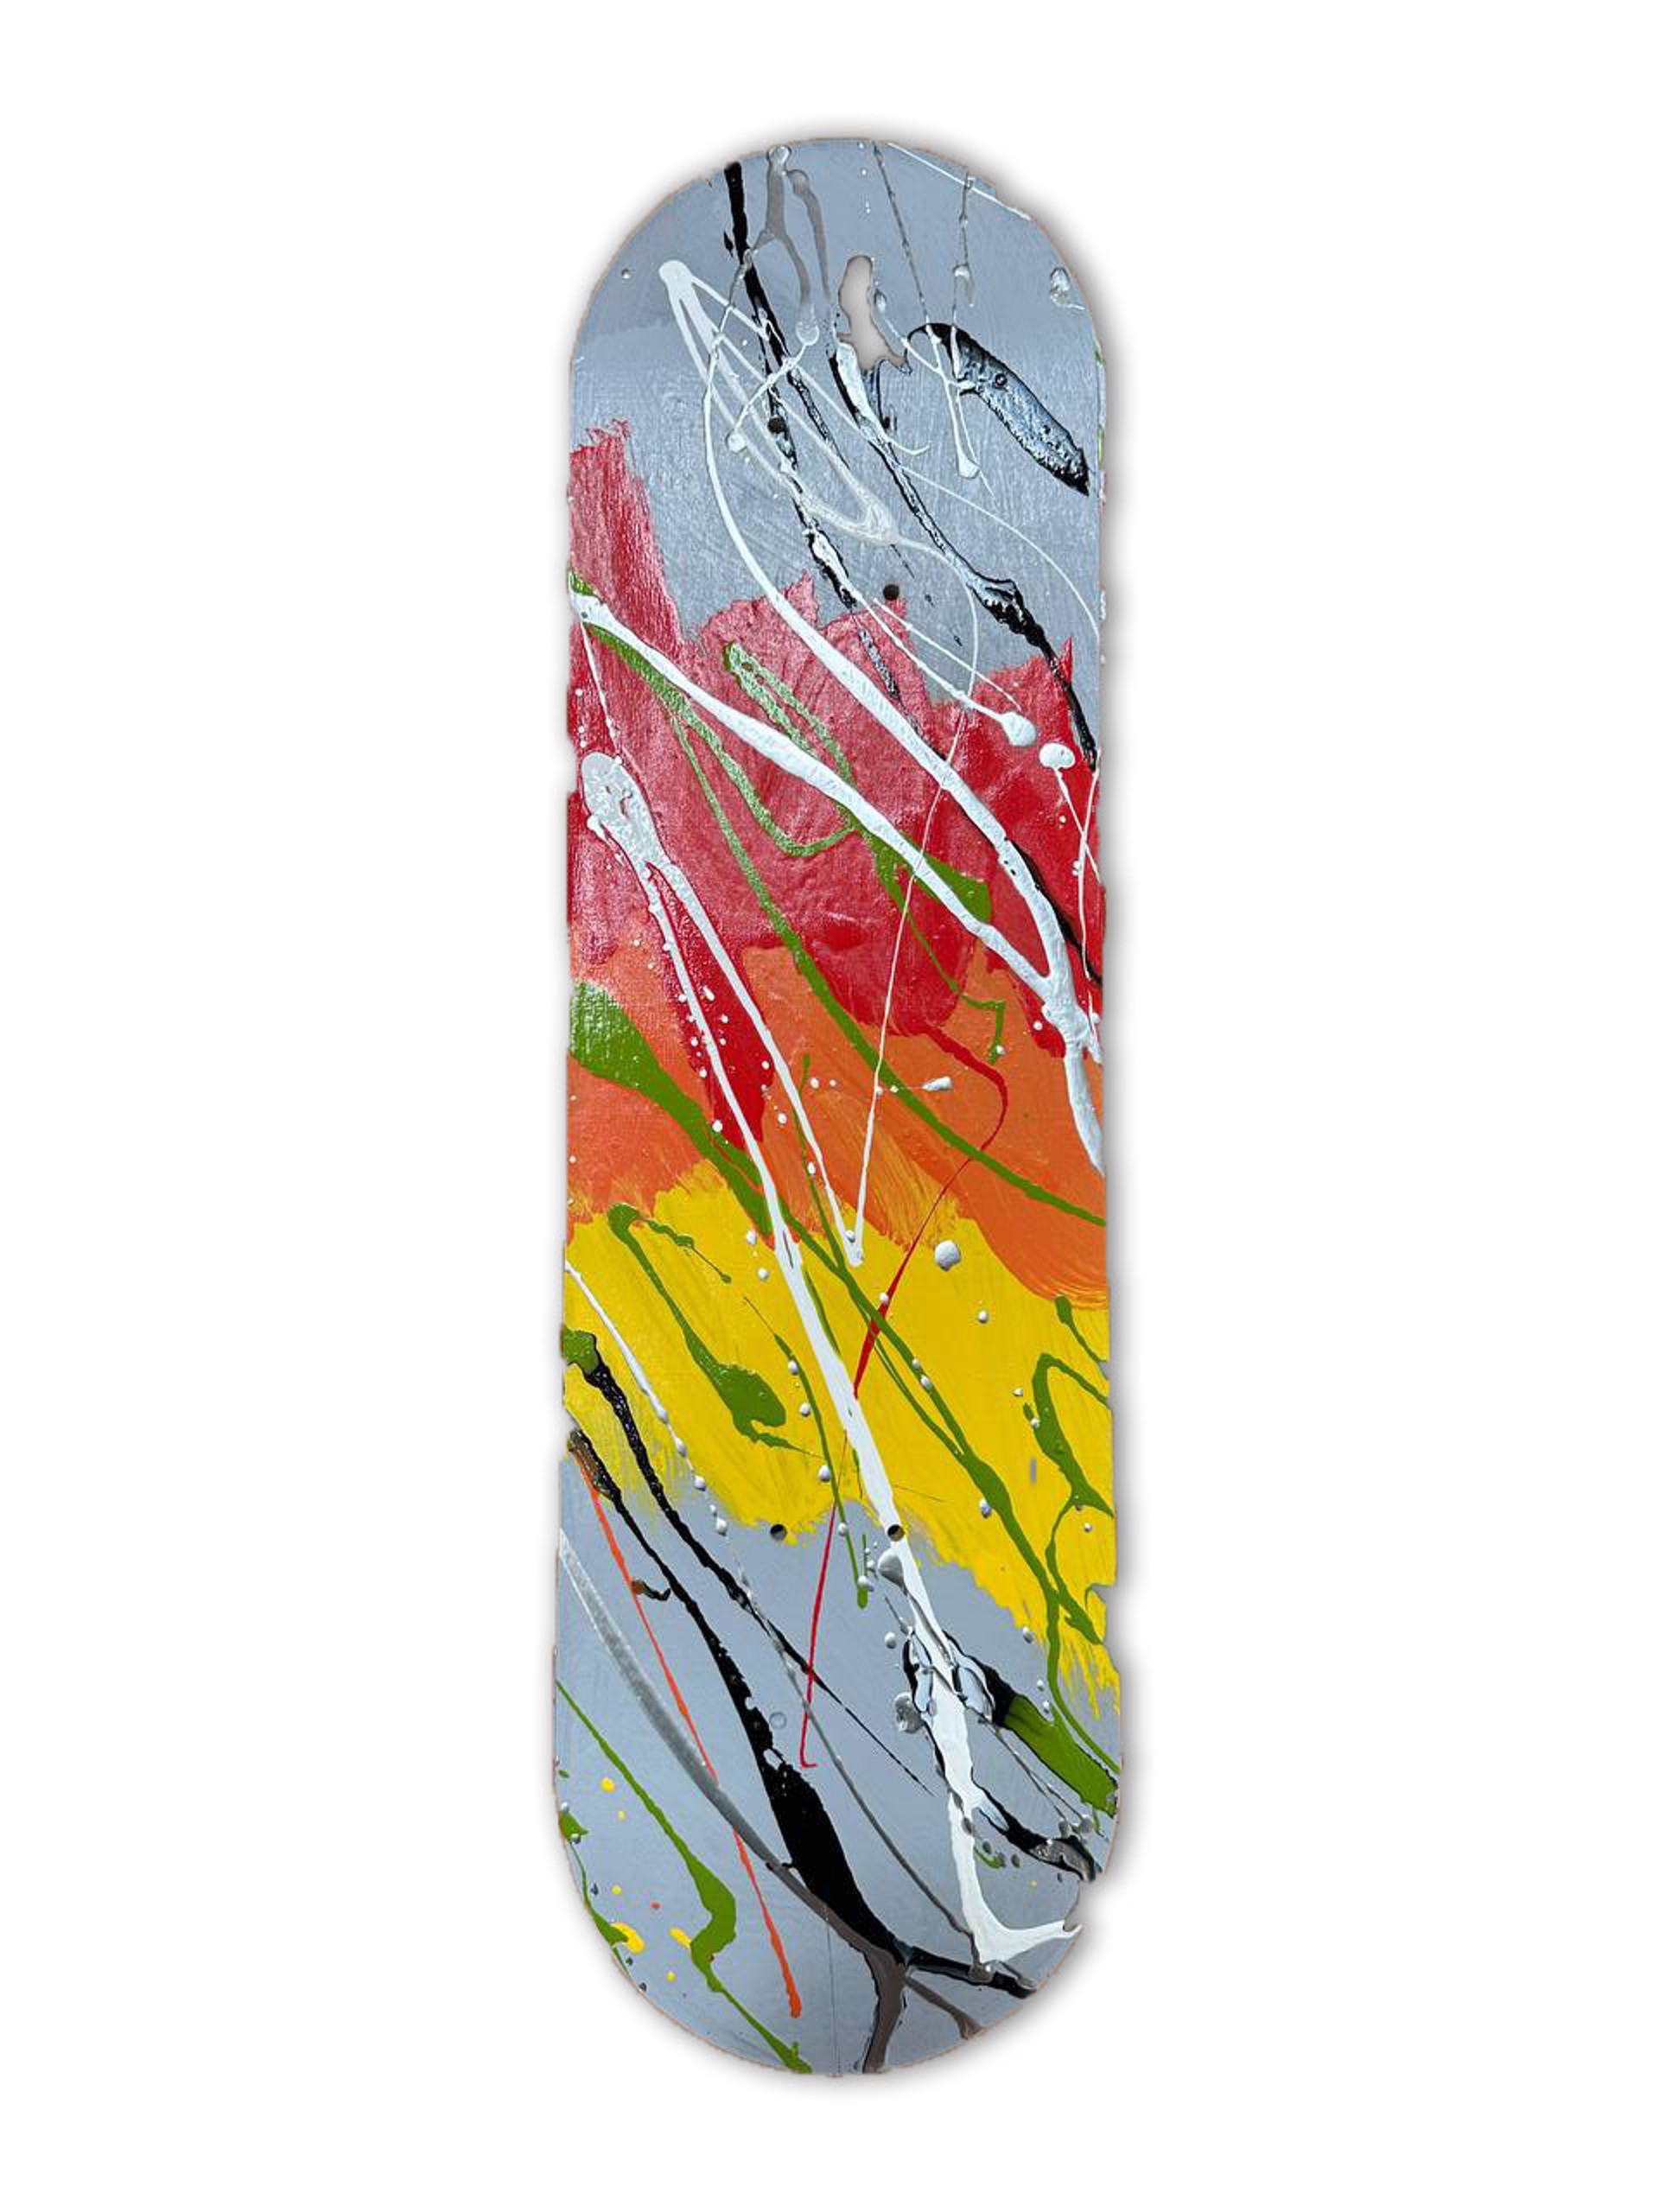 "Abstract Skateboard V (Red Orange Yellow)" by Abstract Skateboards Wall Sculptures by Elena Bulatova